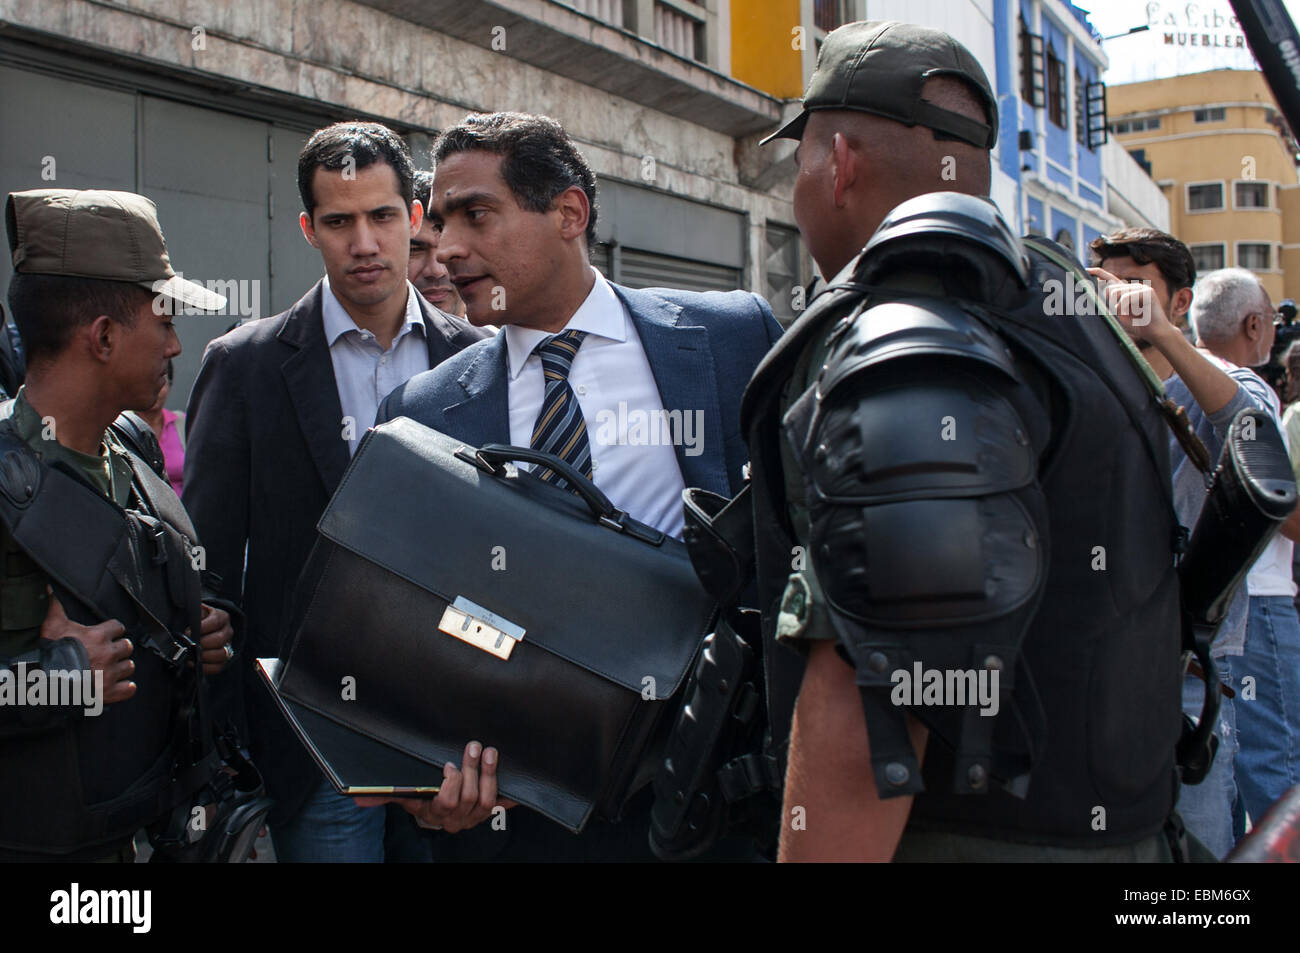 Caracas, Venezuela. 2nd Dec, 2014. Juan Carlos Gutierrez (C), attorney of the opposition leader Leopoldo Lopez, arrives at the Palace of Justice in Caracas, Venezuela, on Dec. 2, 2014. The UN High Commissioner for Human Rights Zeid Ra'ad Al Hussein called on late October for the 'immediate release' of Venezuelan right-wing politicians Leopoldo Lopez and Daniel Ceballos, and others arrested following violent anti-government protests that left 40 dead. Credit:  Boris Vergara/Xinhua/Alamy Live News Stock Photo